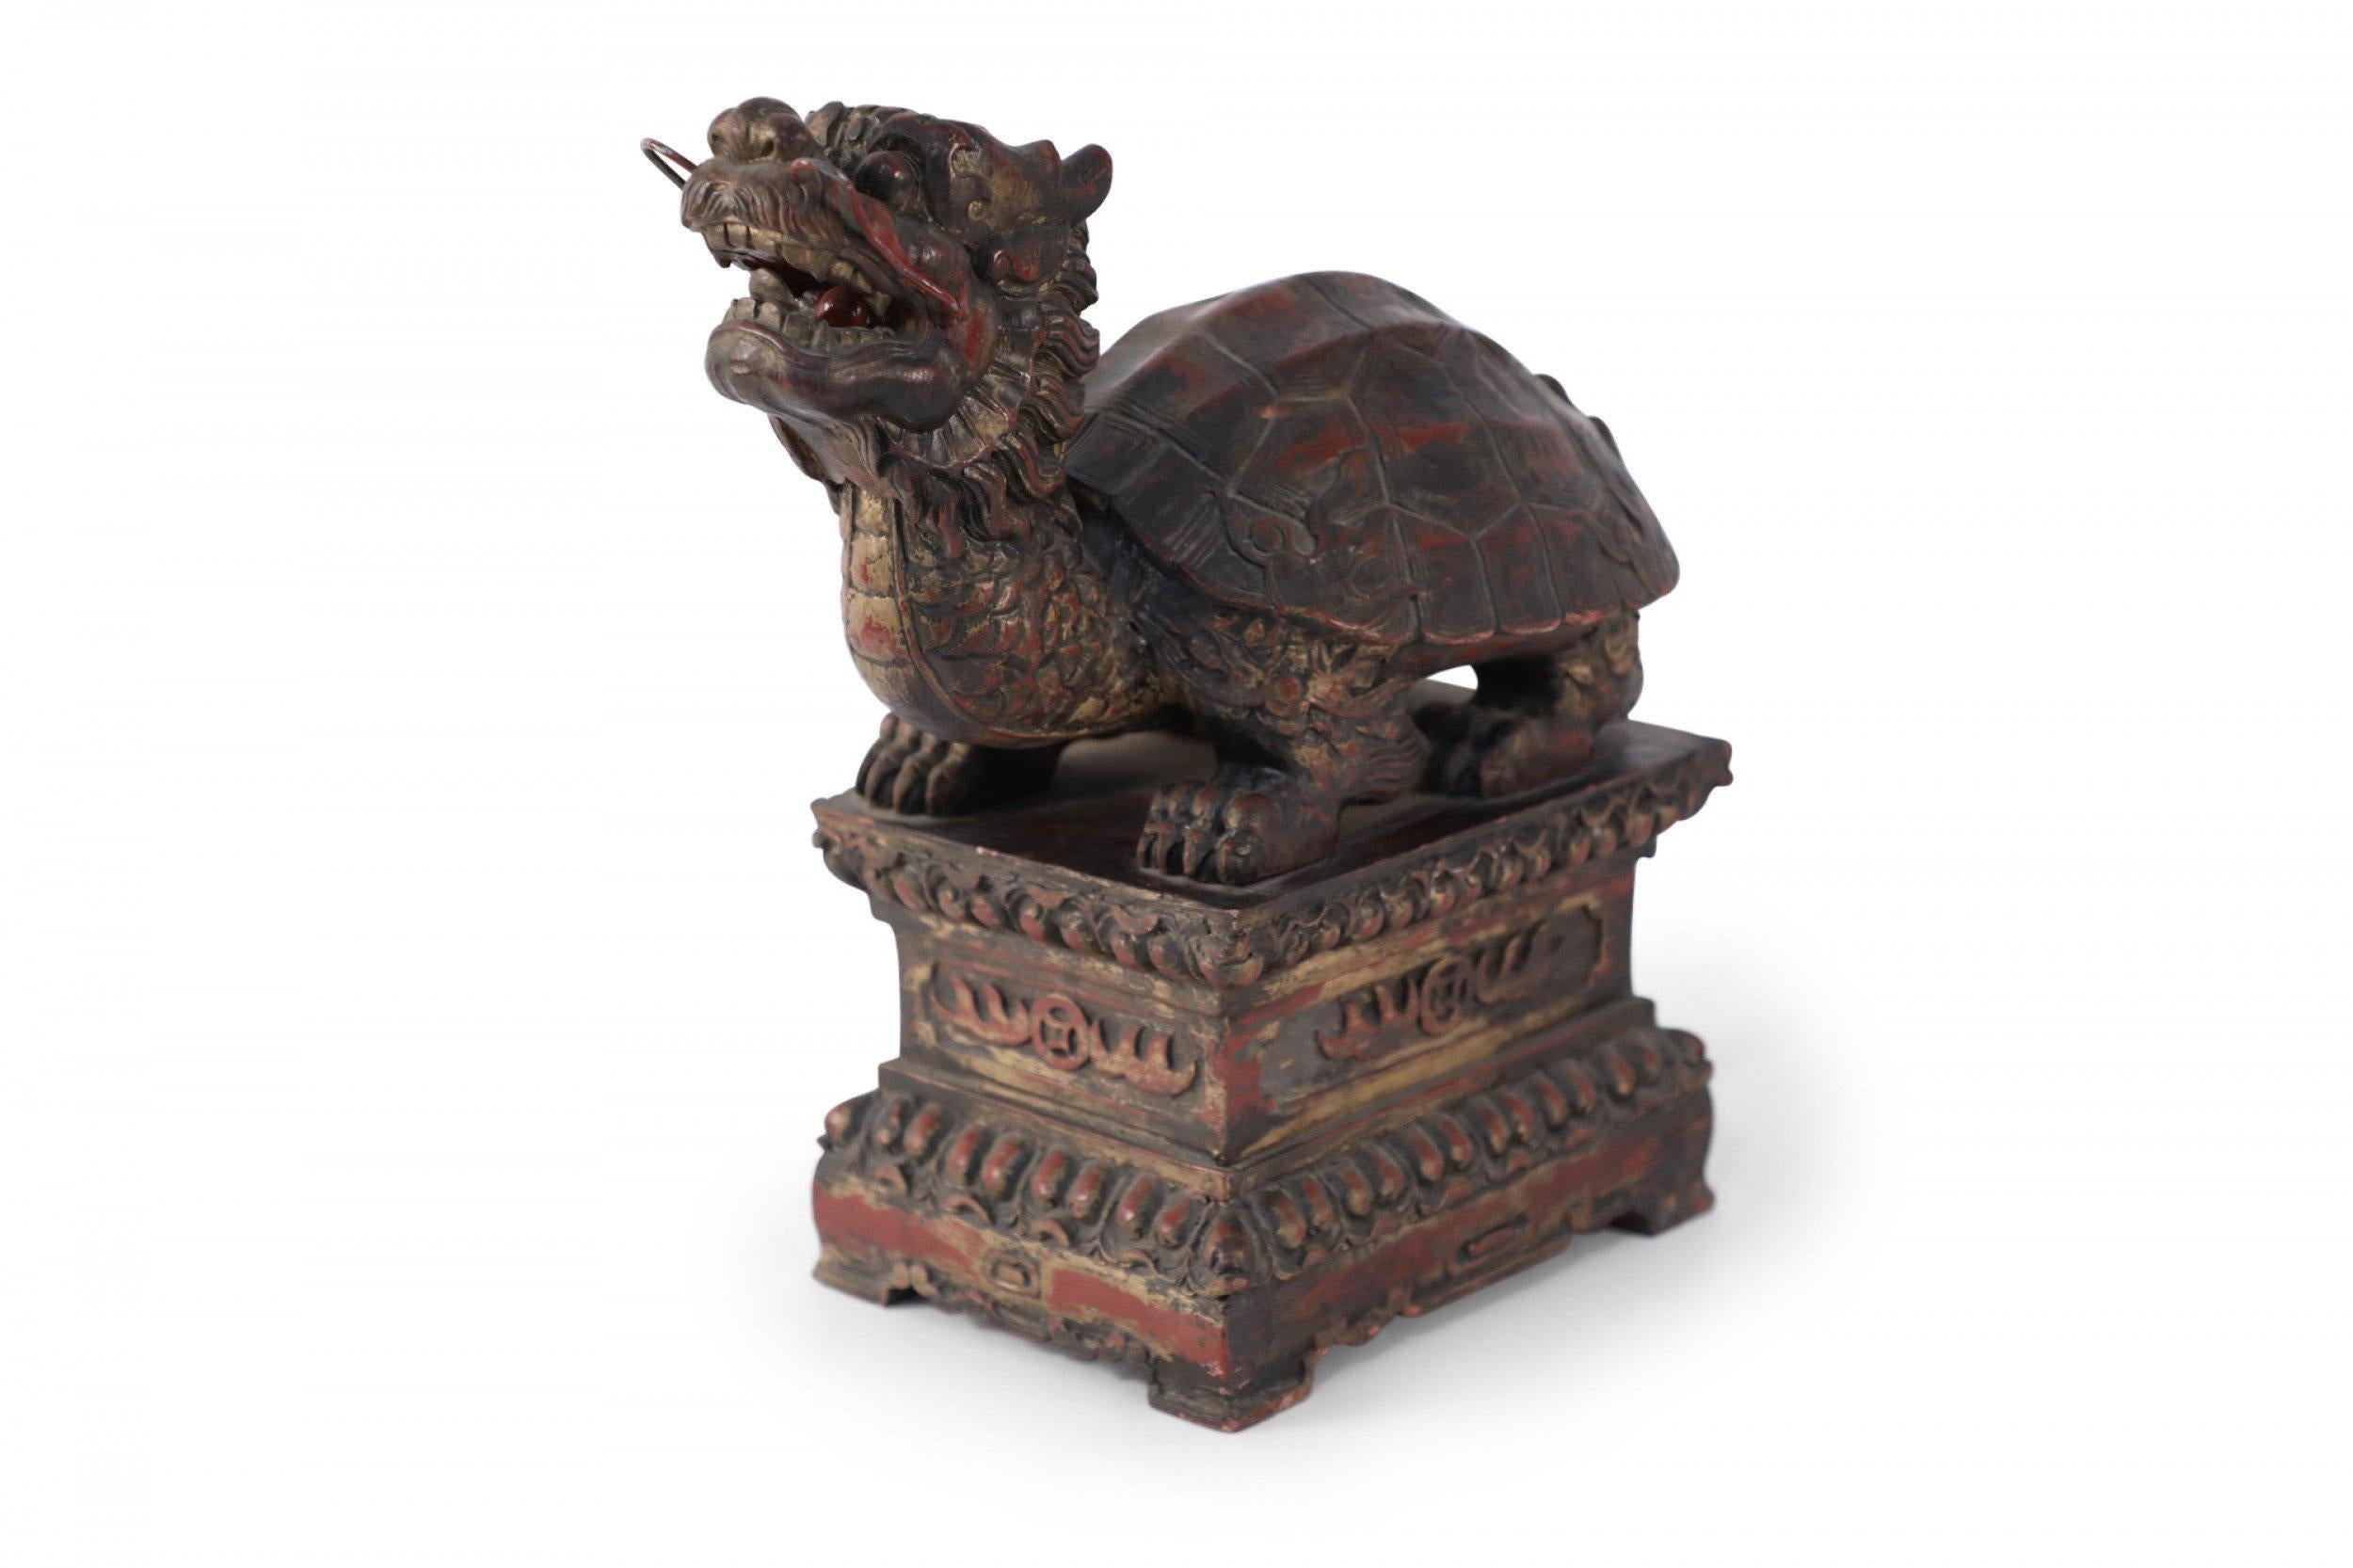 Antique Chinese Carved Wooden Longgui Dragon Turtle Sculpture For Sale 2